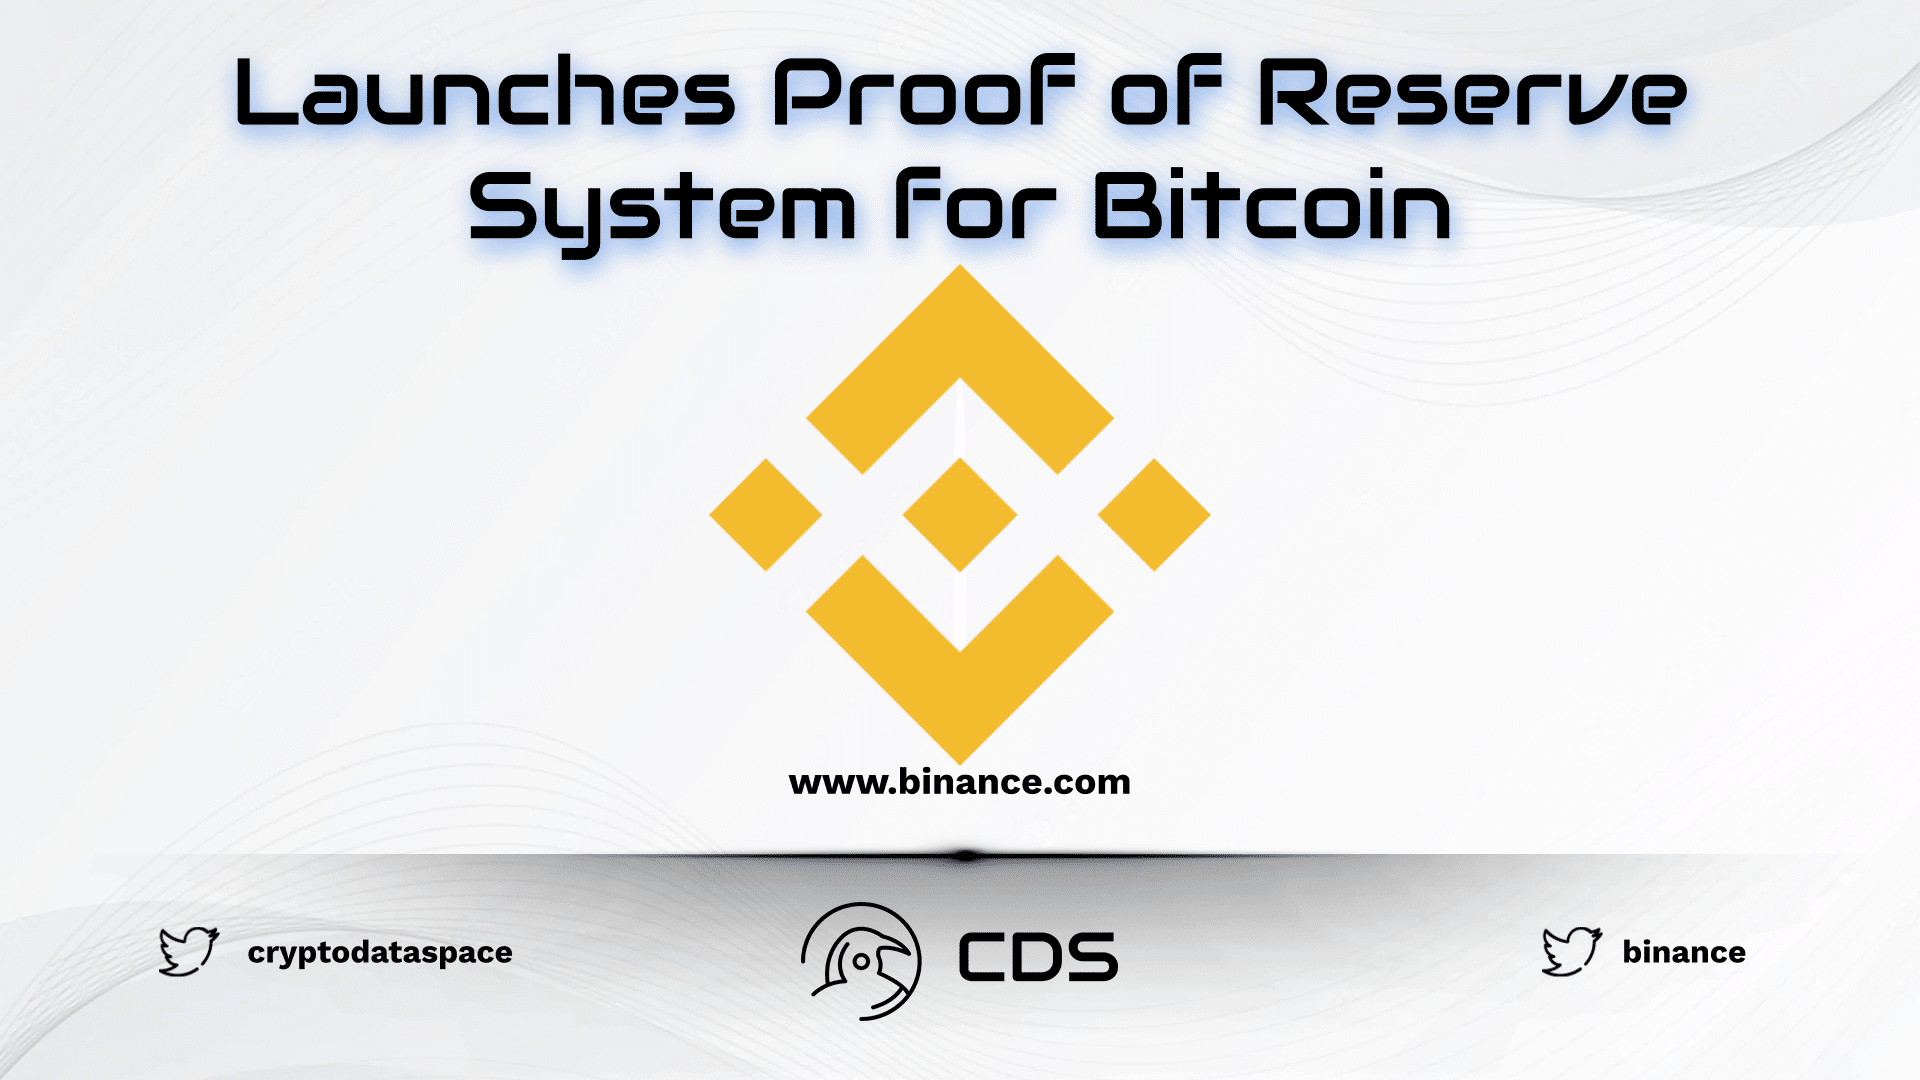 binance launches proof of reserve system for bitcoin